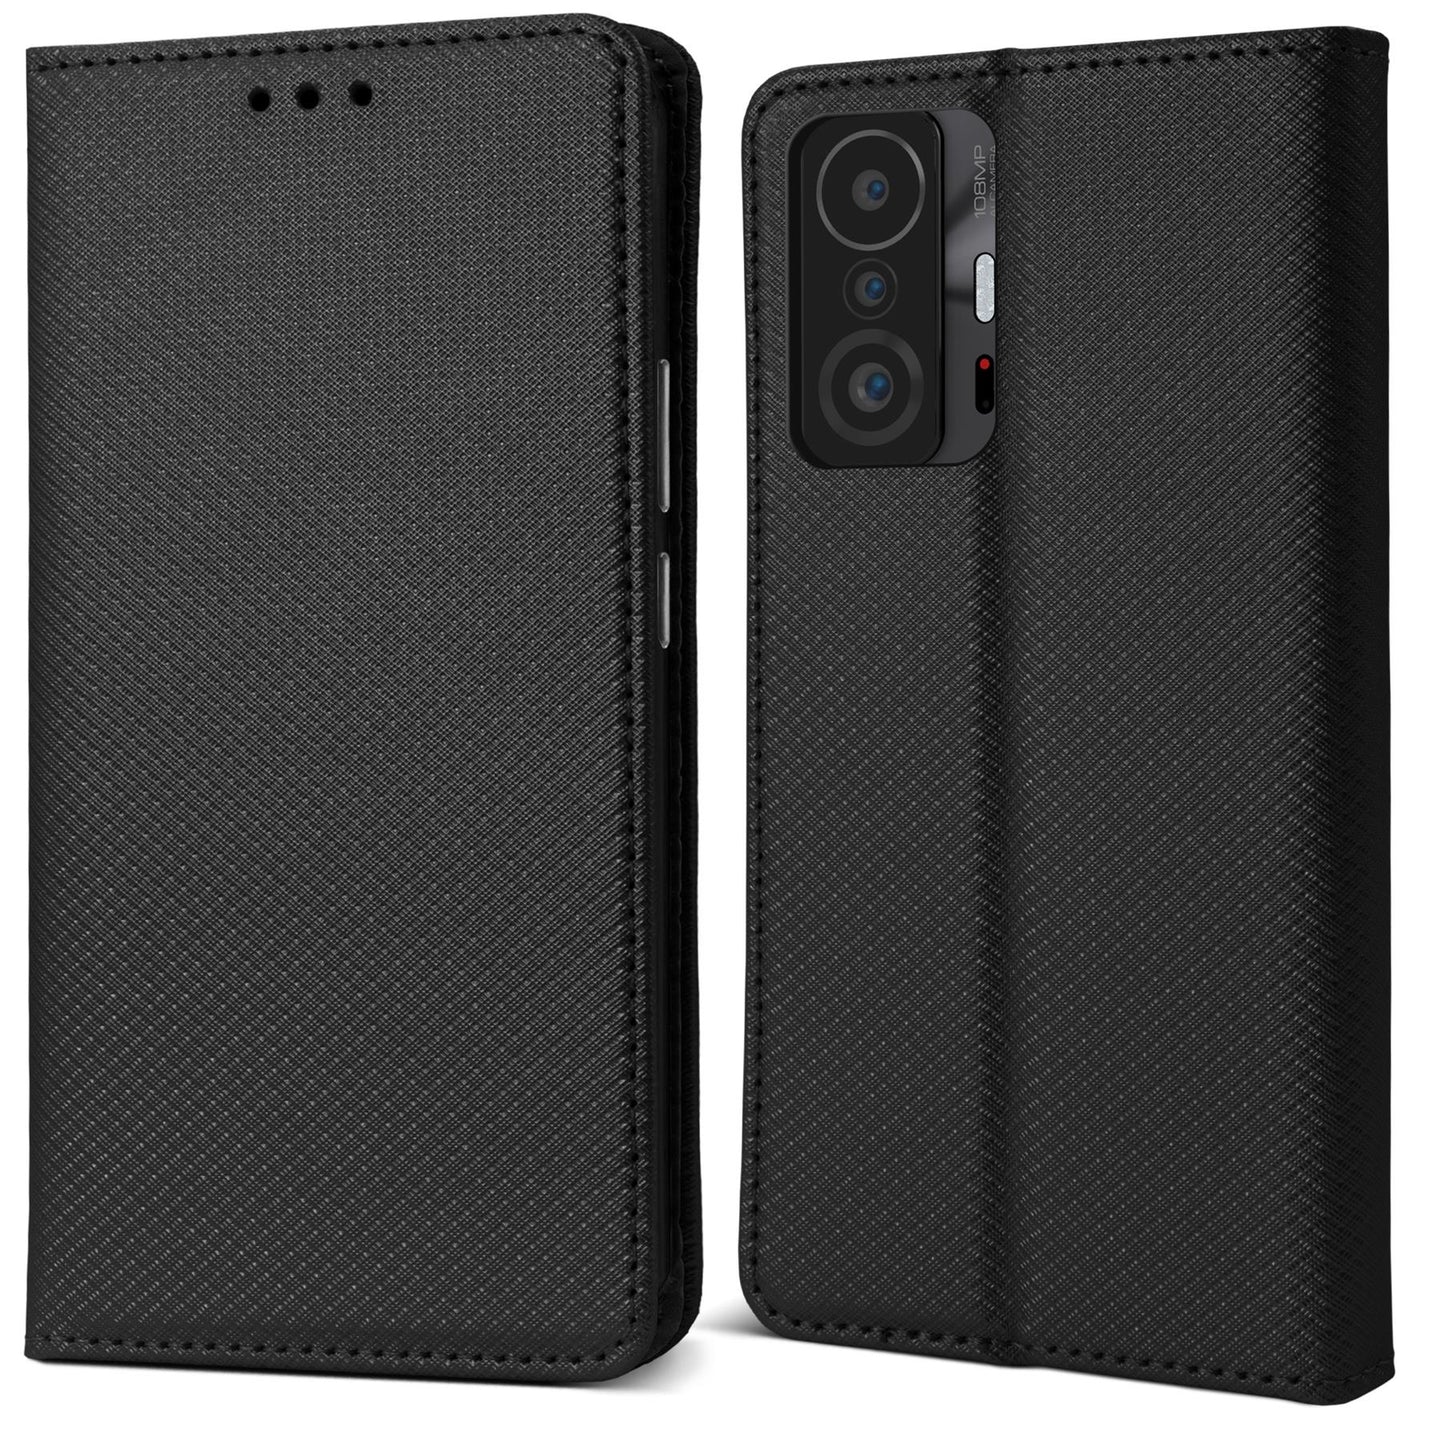 Moozy Case Flip Cover for Xiaomi 11T and Xiaomi 11T Pro, Black - Smart Magnetic Flip Case Flip Folio Wallet Case with Card Holder and Stand, Credit Card Slots, Kickstand Function